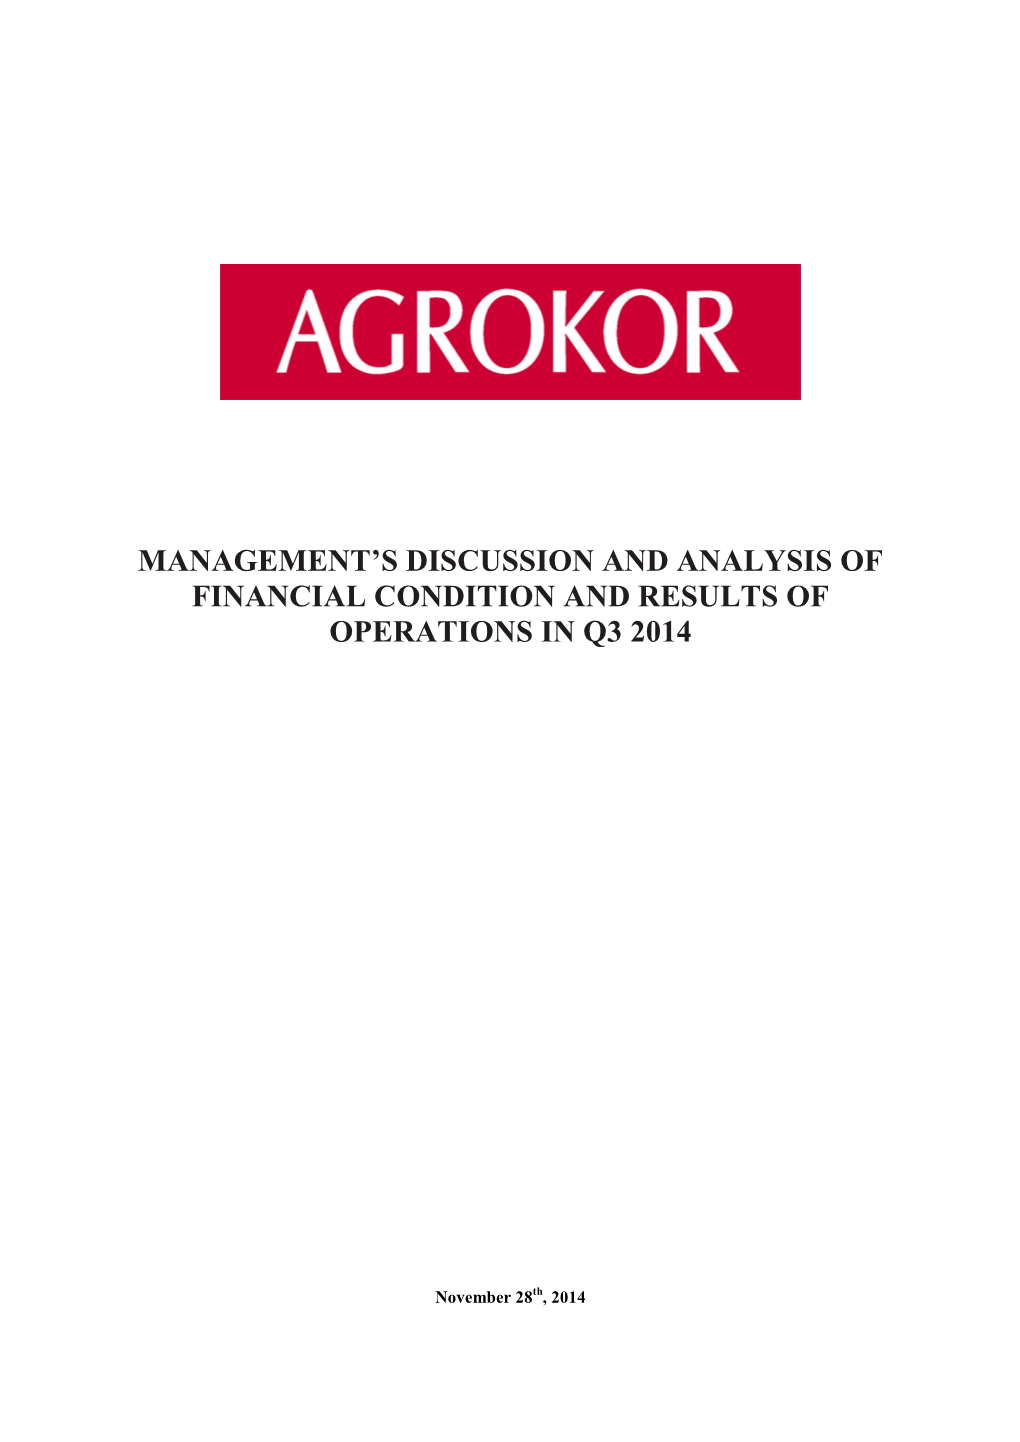 Management's Discussion and Analysis of Financial Condition And